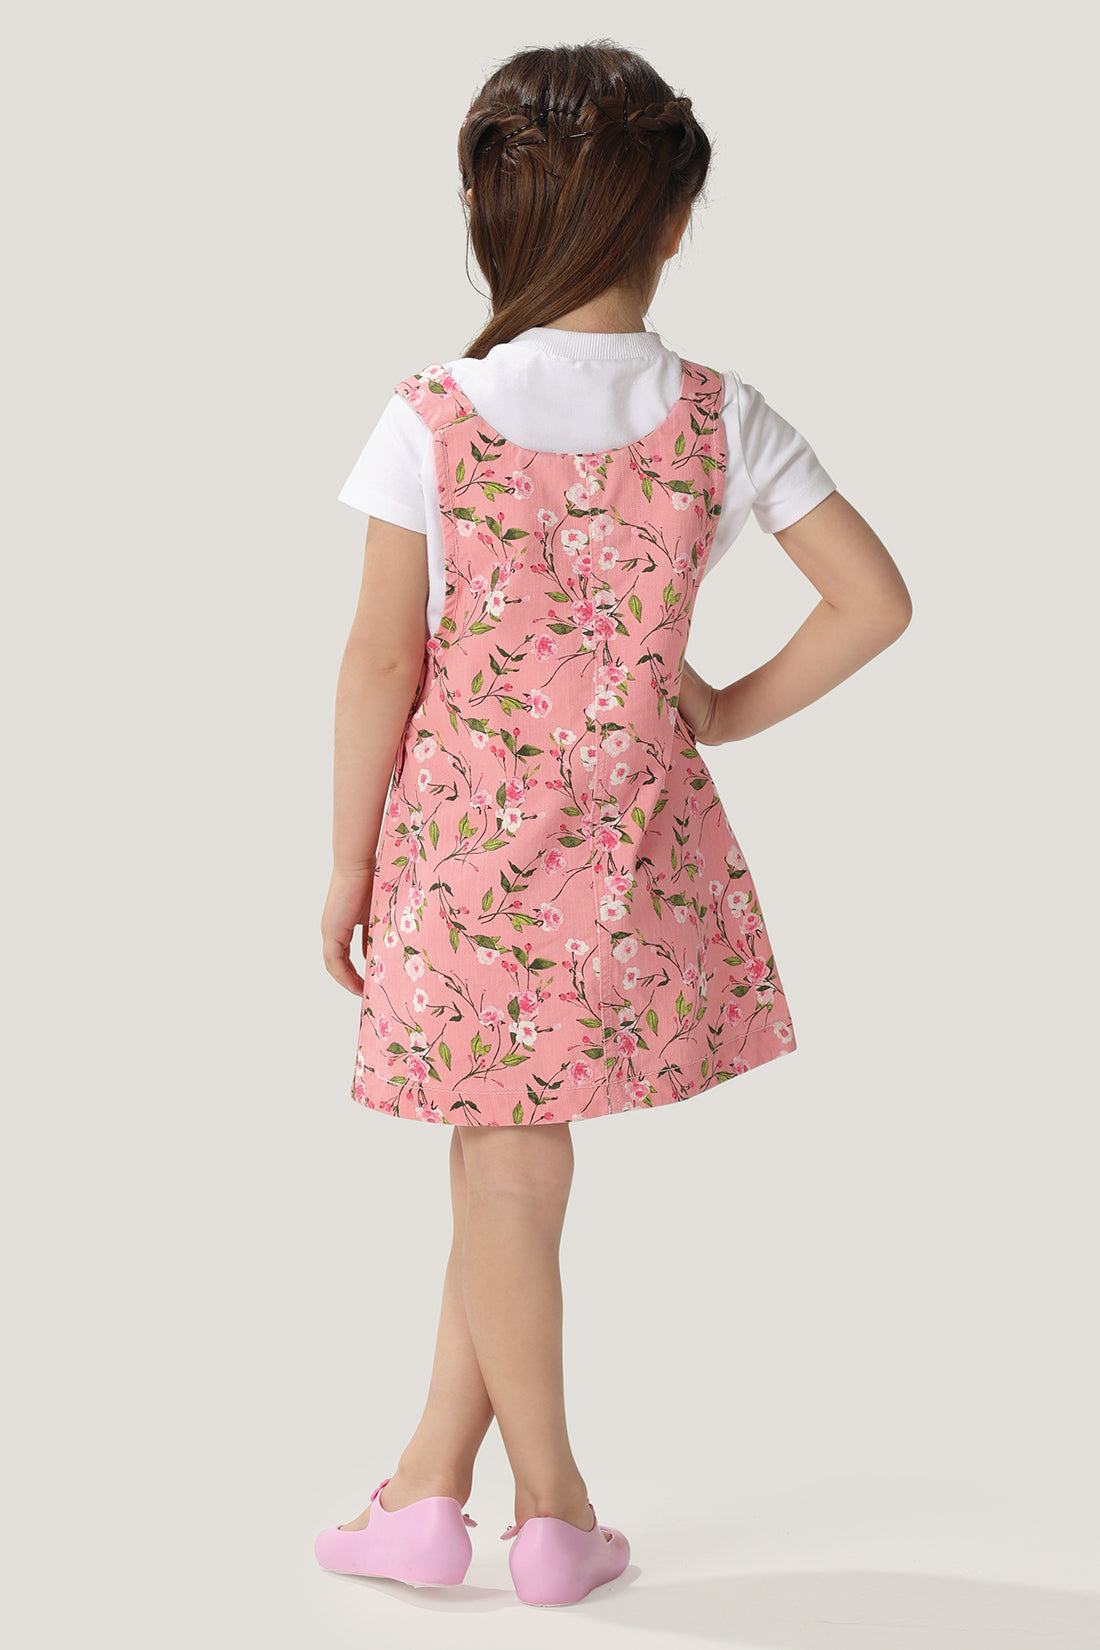 One Friday Baby Girls Pink Floral Printed Dungaree with White Tee